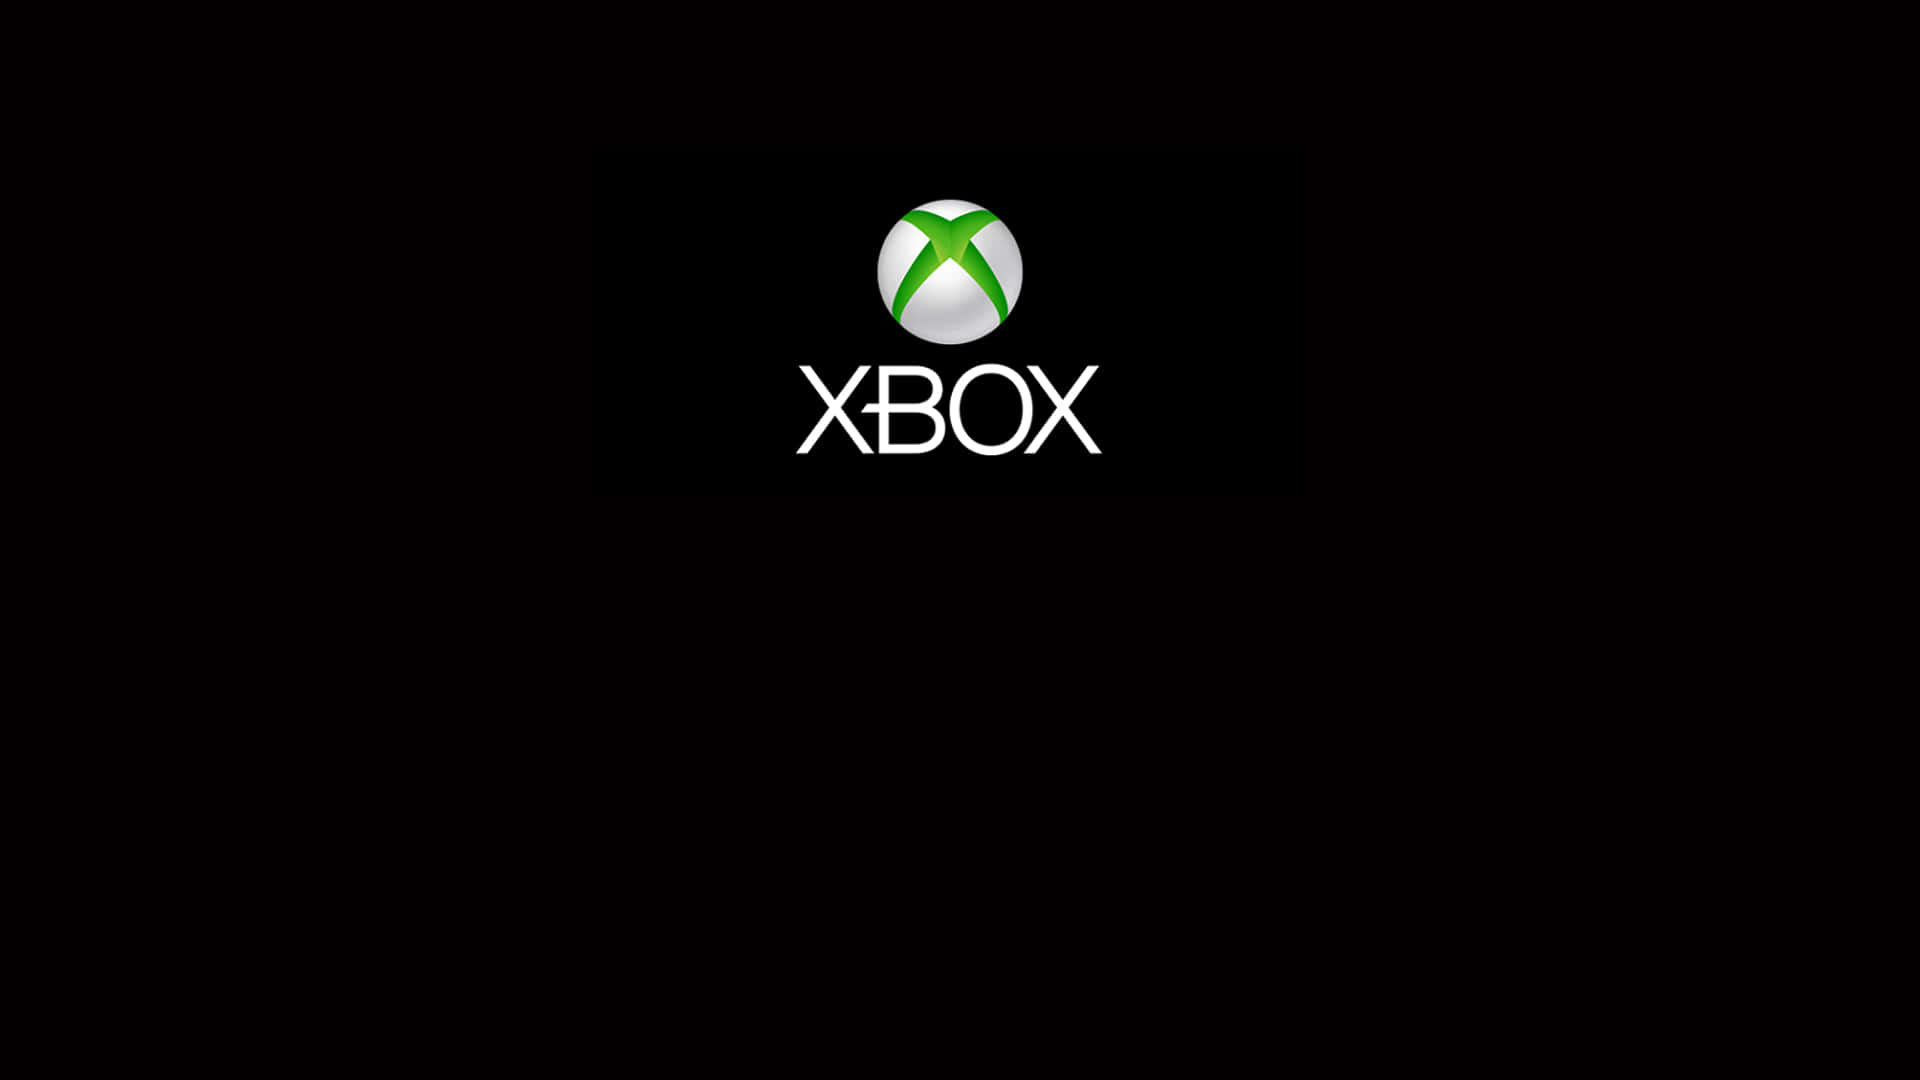 Enjoy a World of Gaming with Xbox